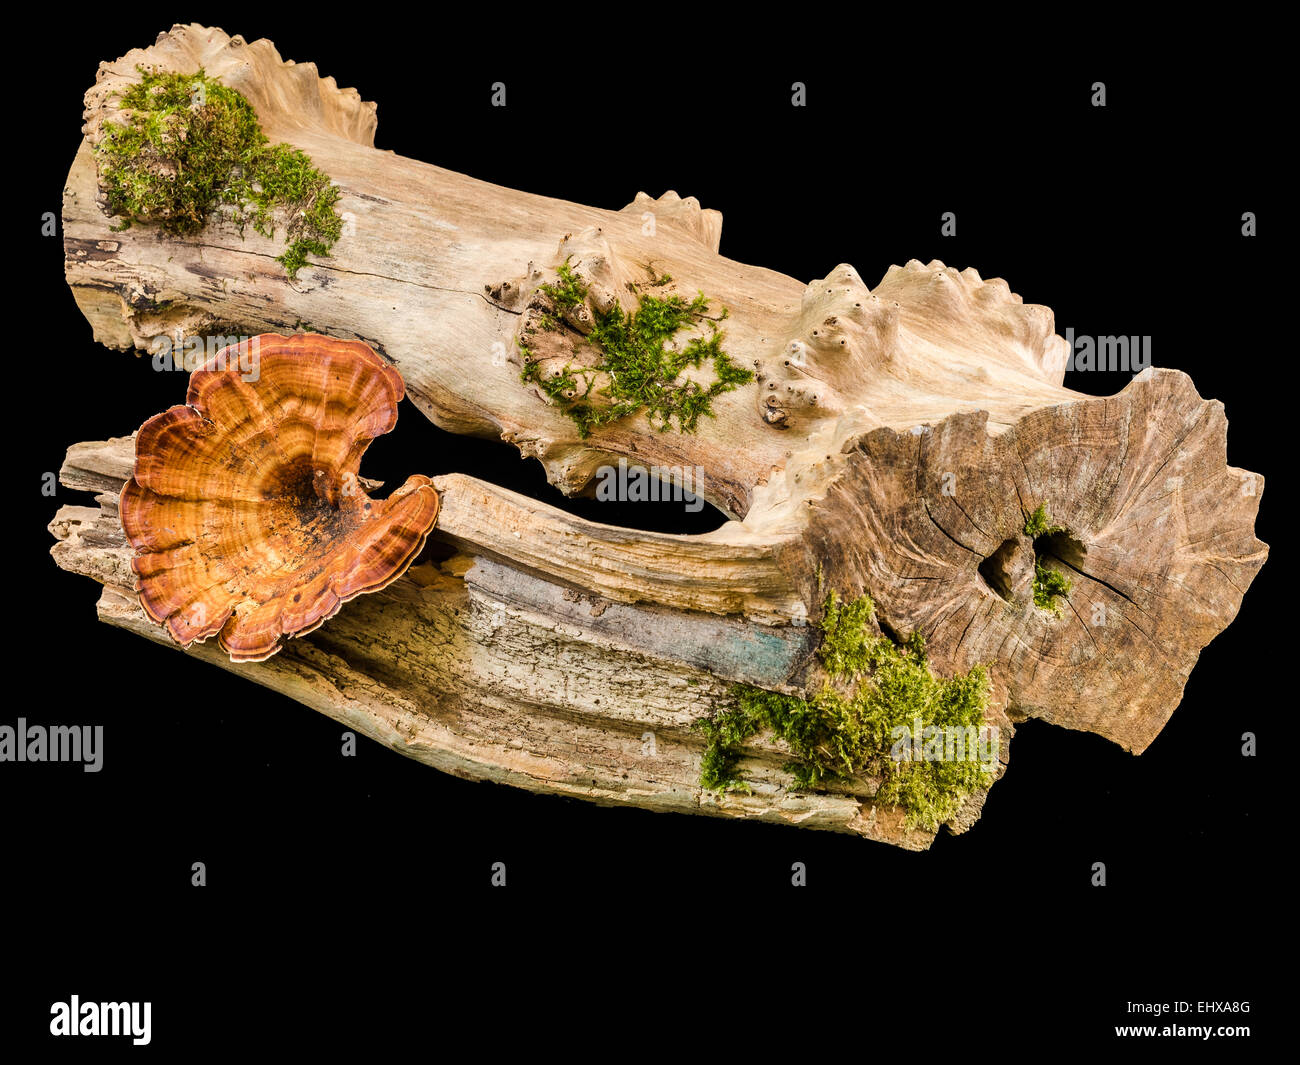 An artful wood display with fungus, moss on a driftwood base Stock Photo